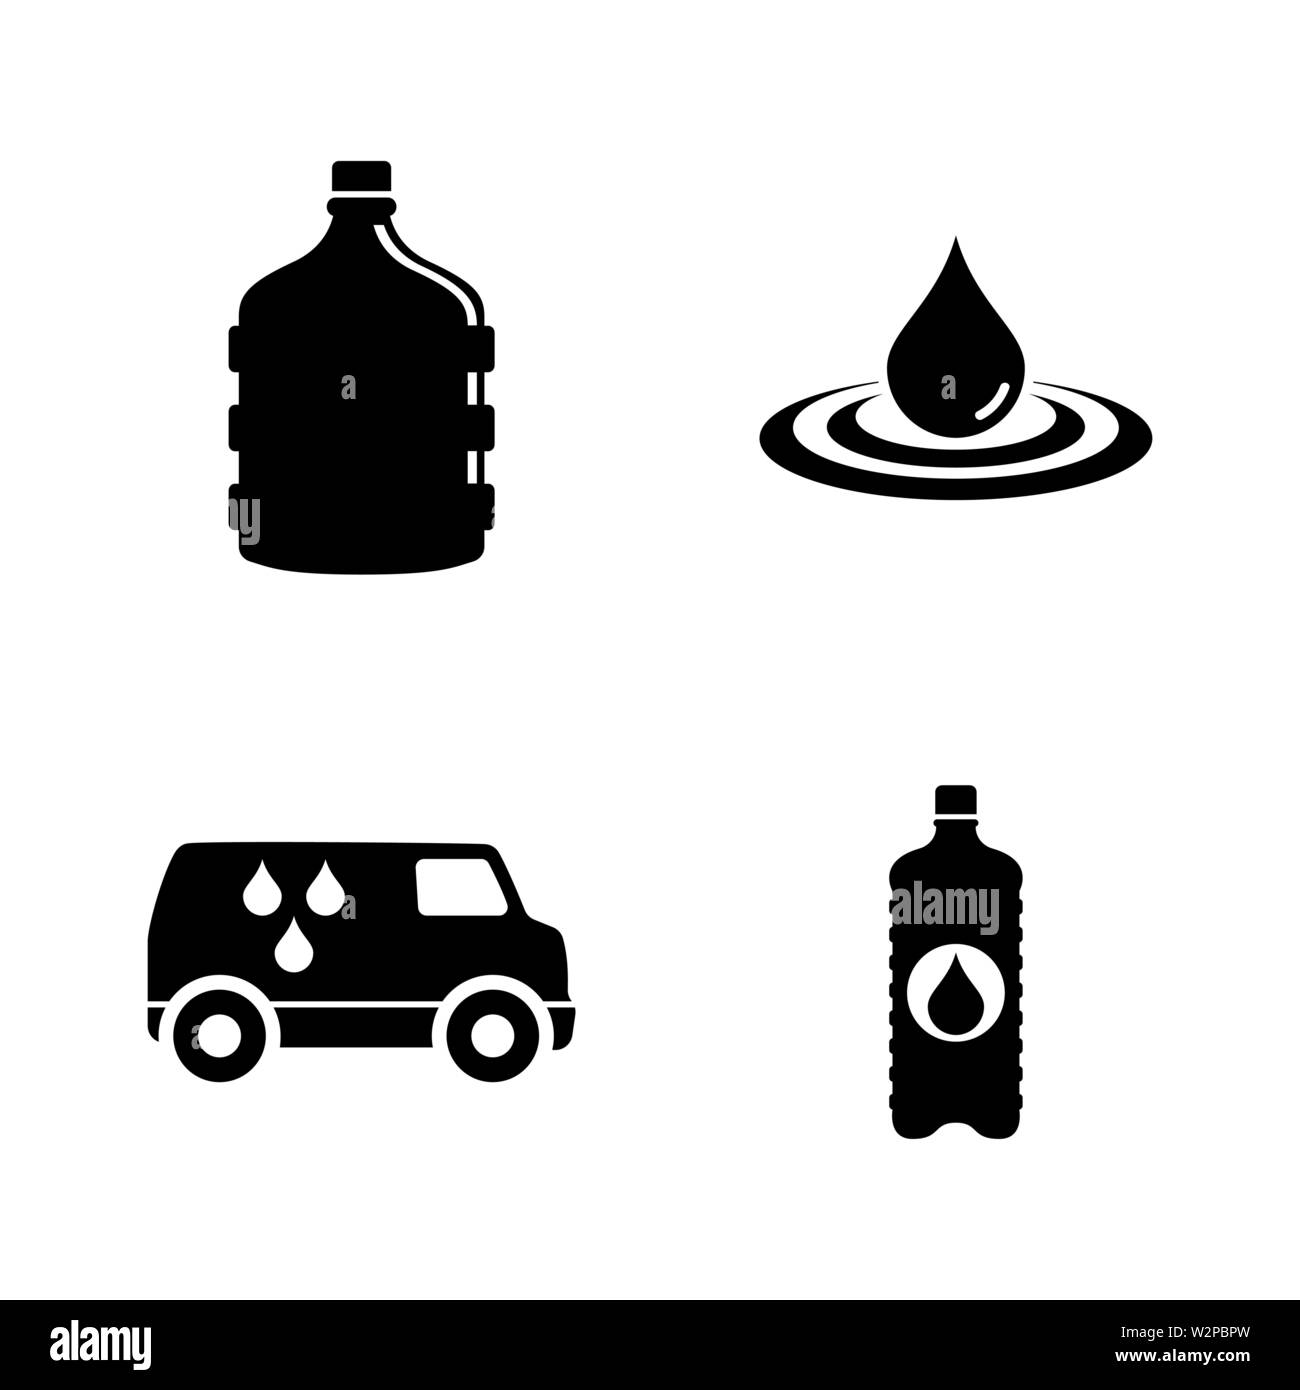 Bottled Water Delivery. Simple Related Vector Icons Set for Video, Mobile Apps, Web Sites, Print Projects and Your Design. Black Flat Illustration on Stock Vector